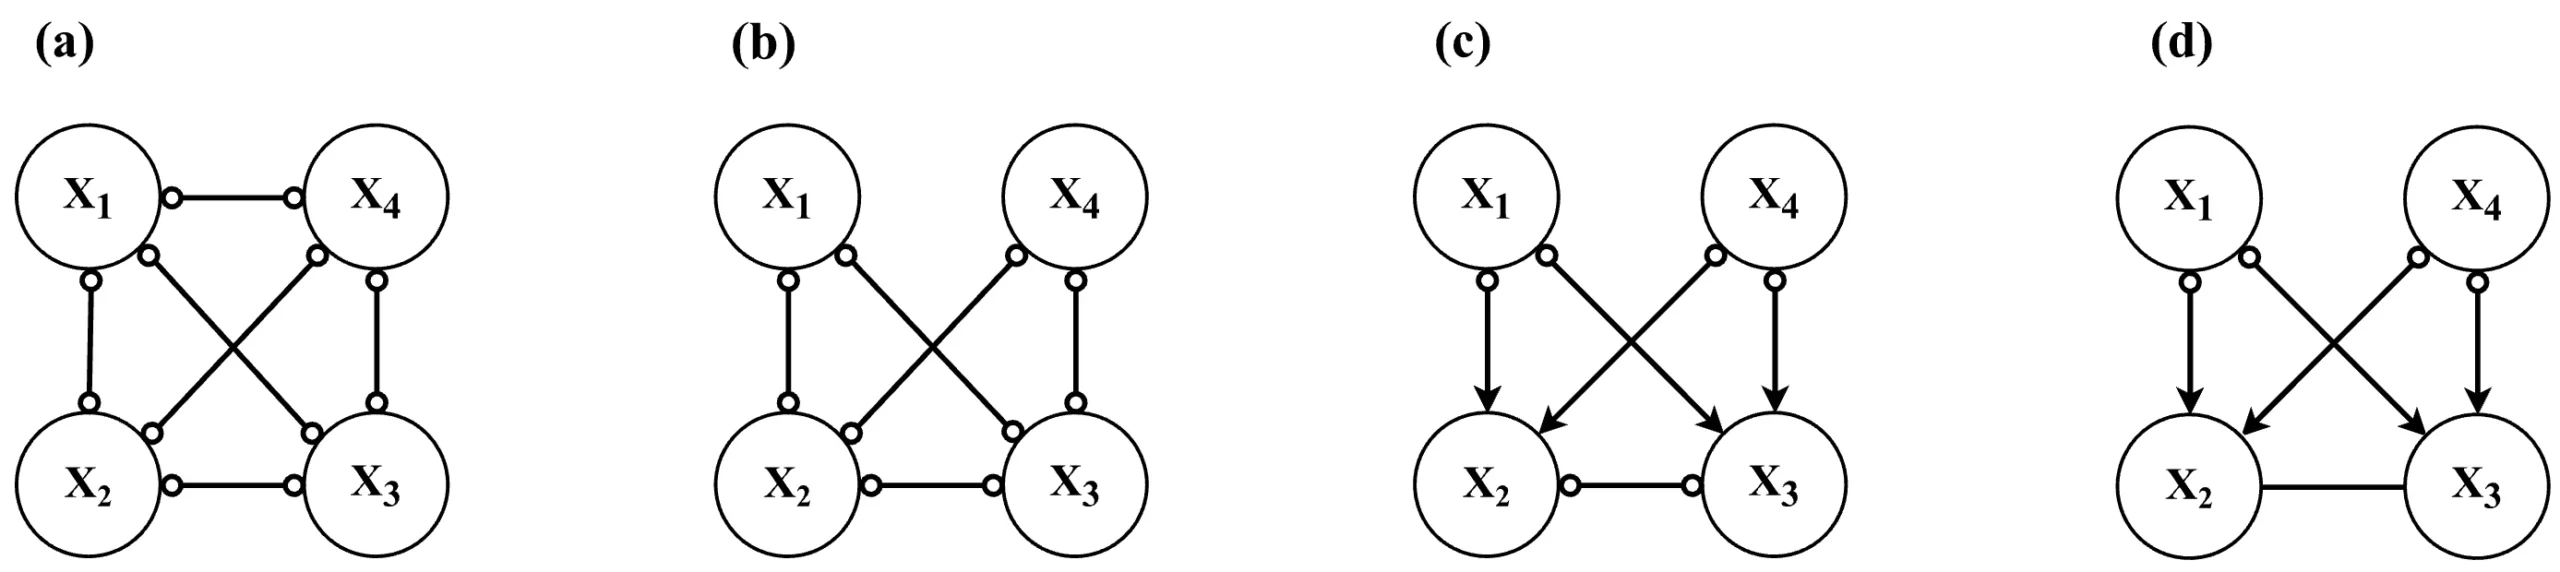 Trace of the cyclic causal inference (CCI) algorithm showing steps in causality analysis.